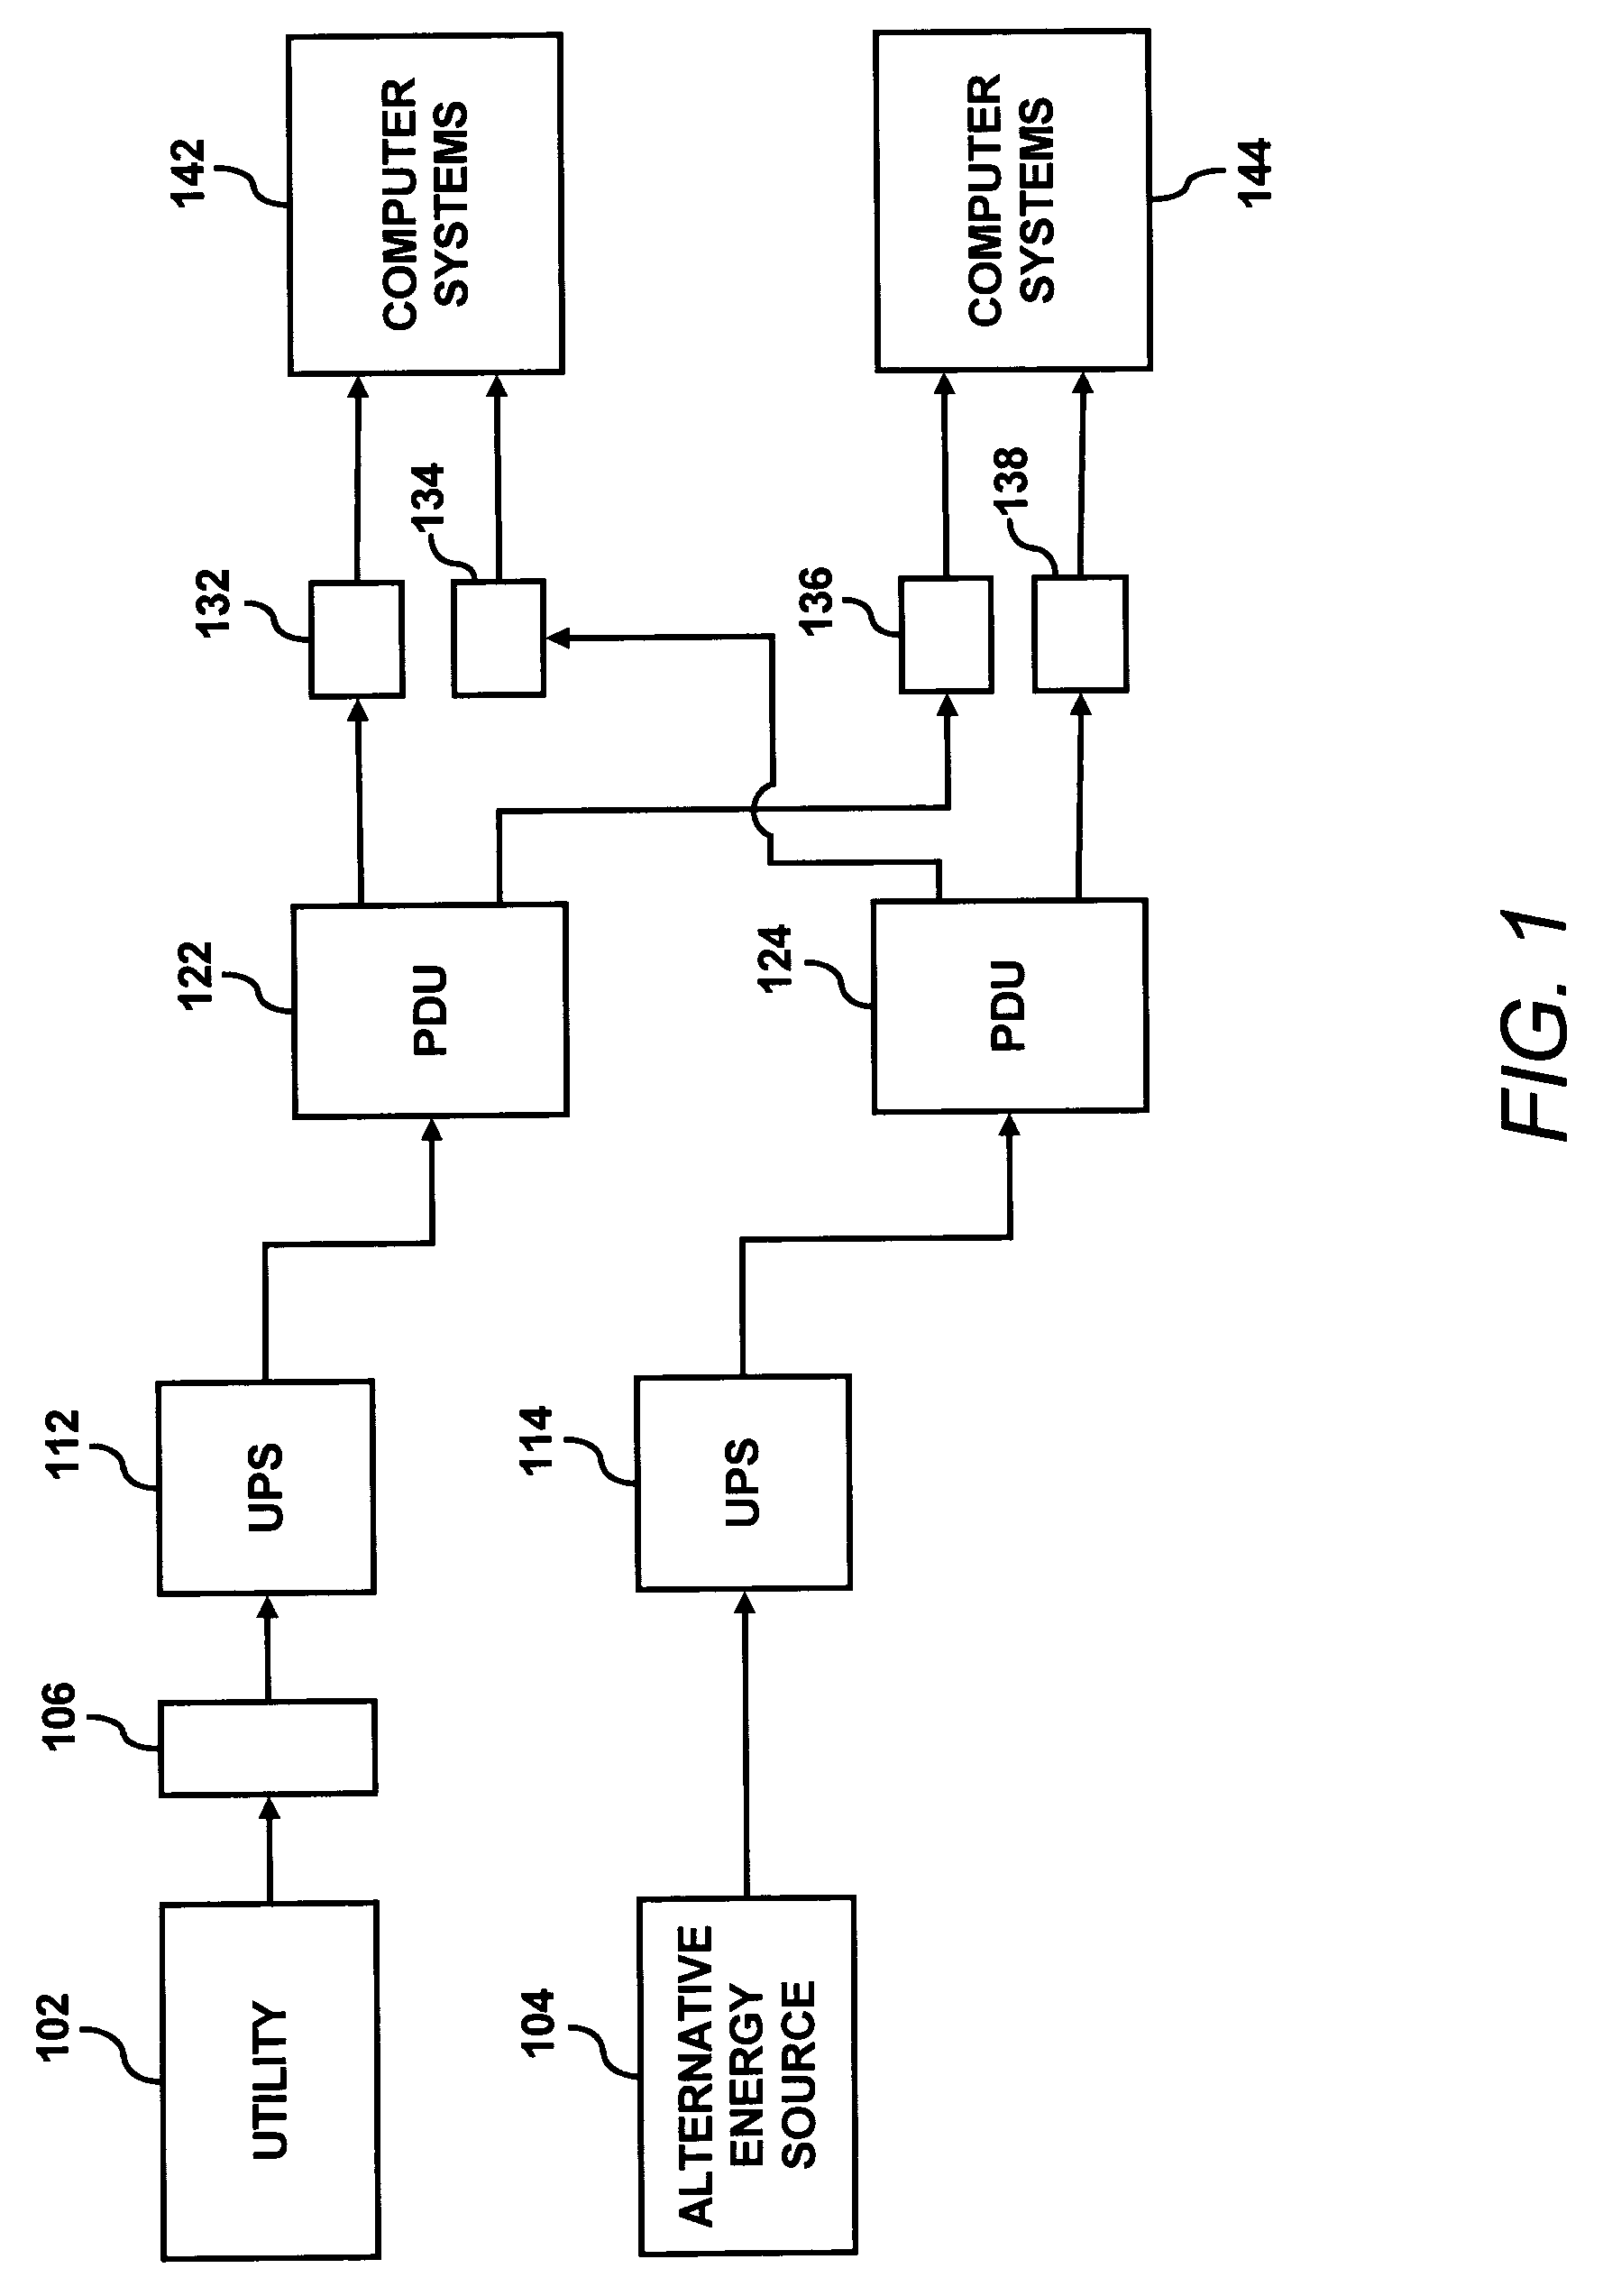 Supplying power to at least one electrical device based on an efficient operating point of a power supply